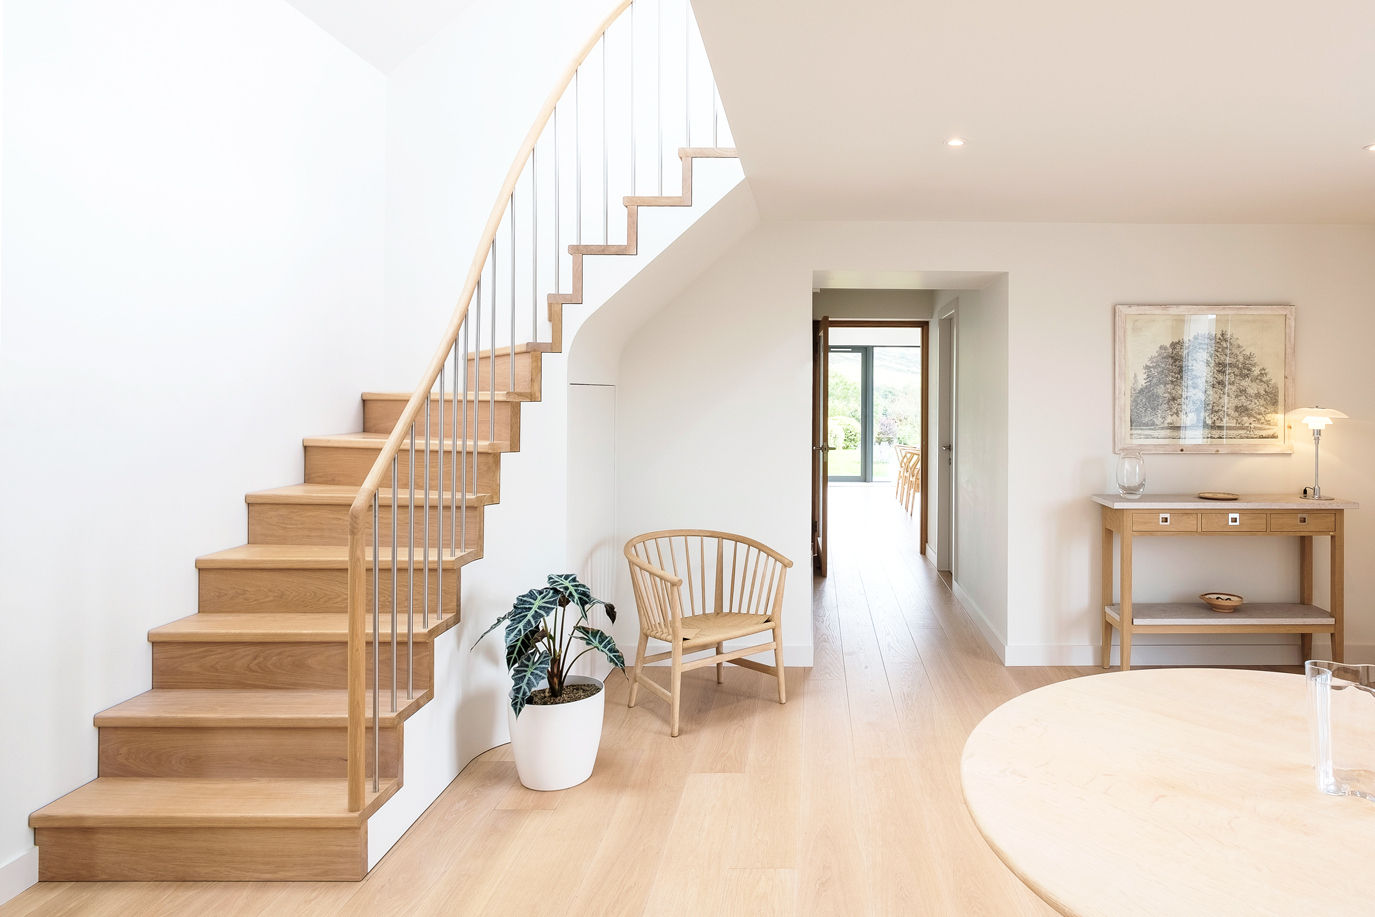 Oak domestic interior with Danish designed oak table and chair, oak staircase and handrail with stainless steel balustrade. White walls and potted plant.